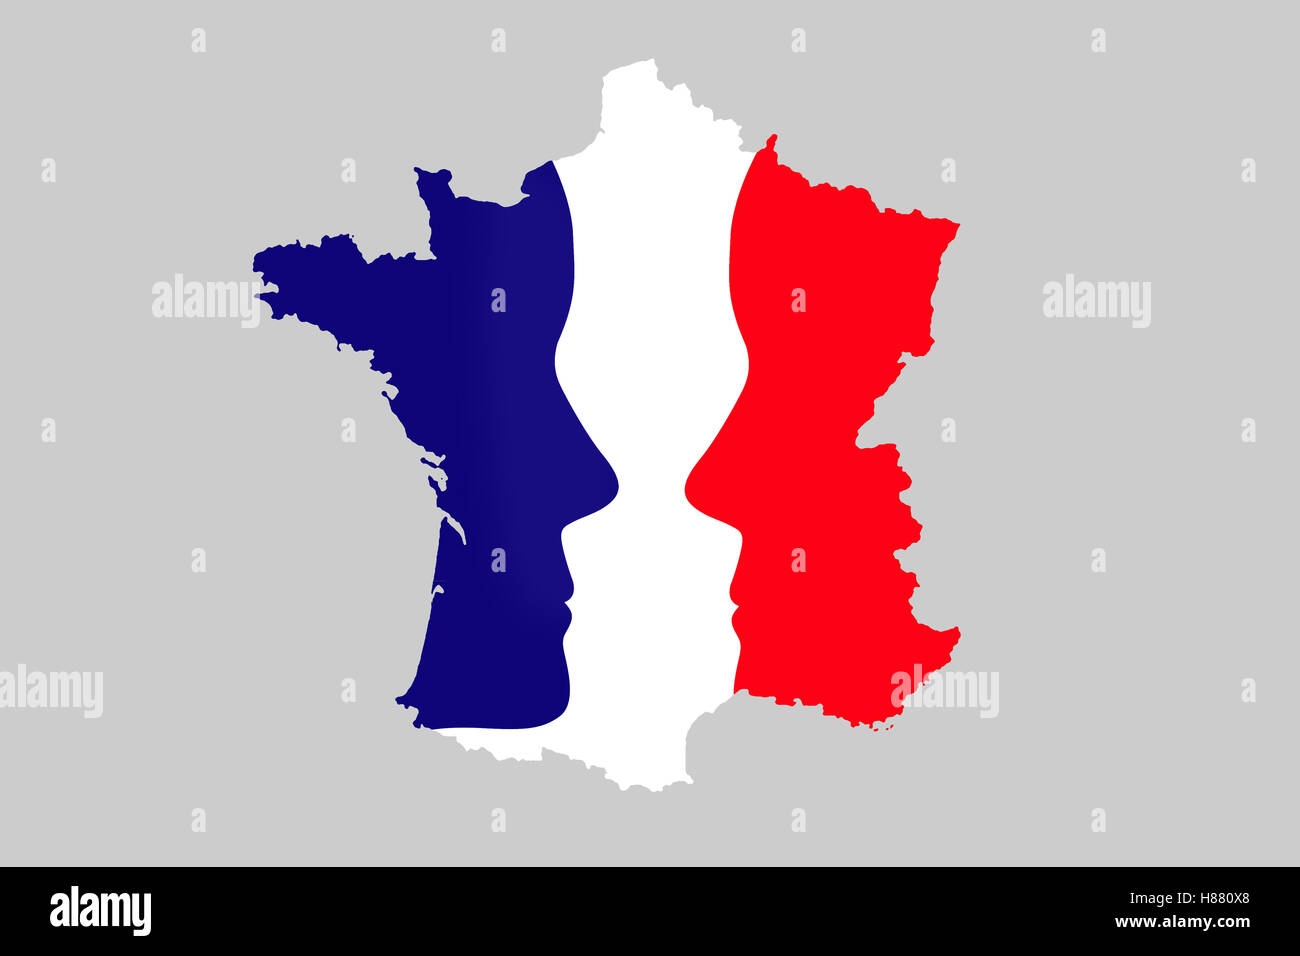 French elections concept, map of France with 2 faces Stock Photo